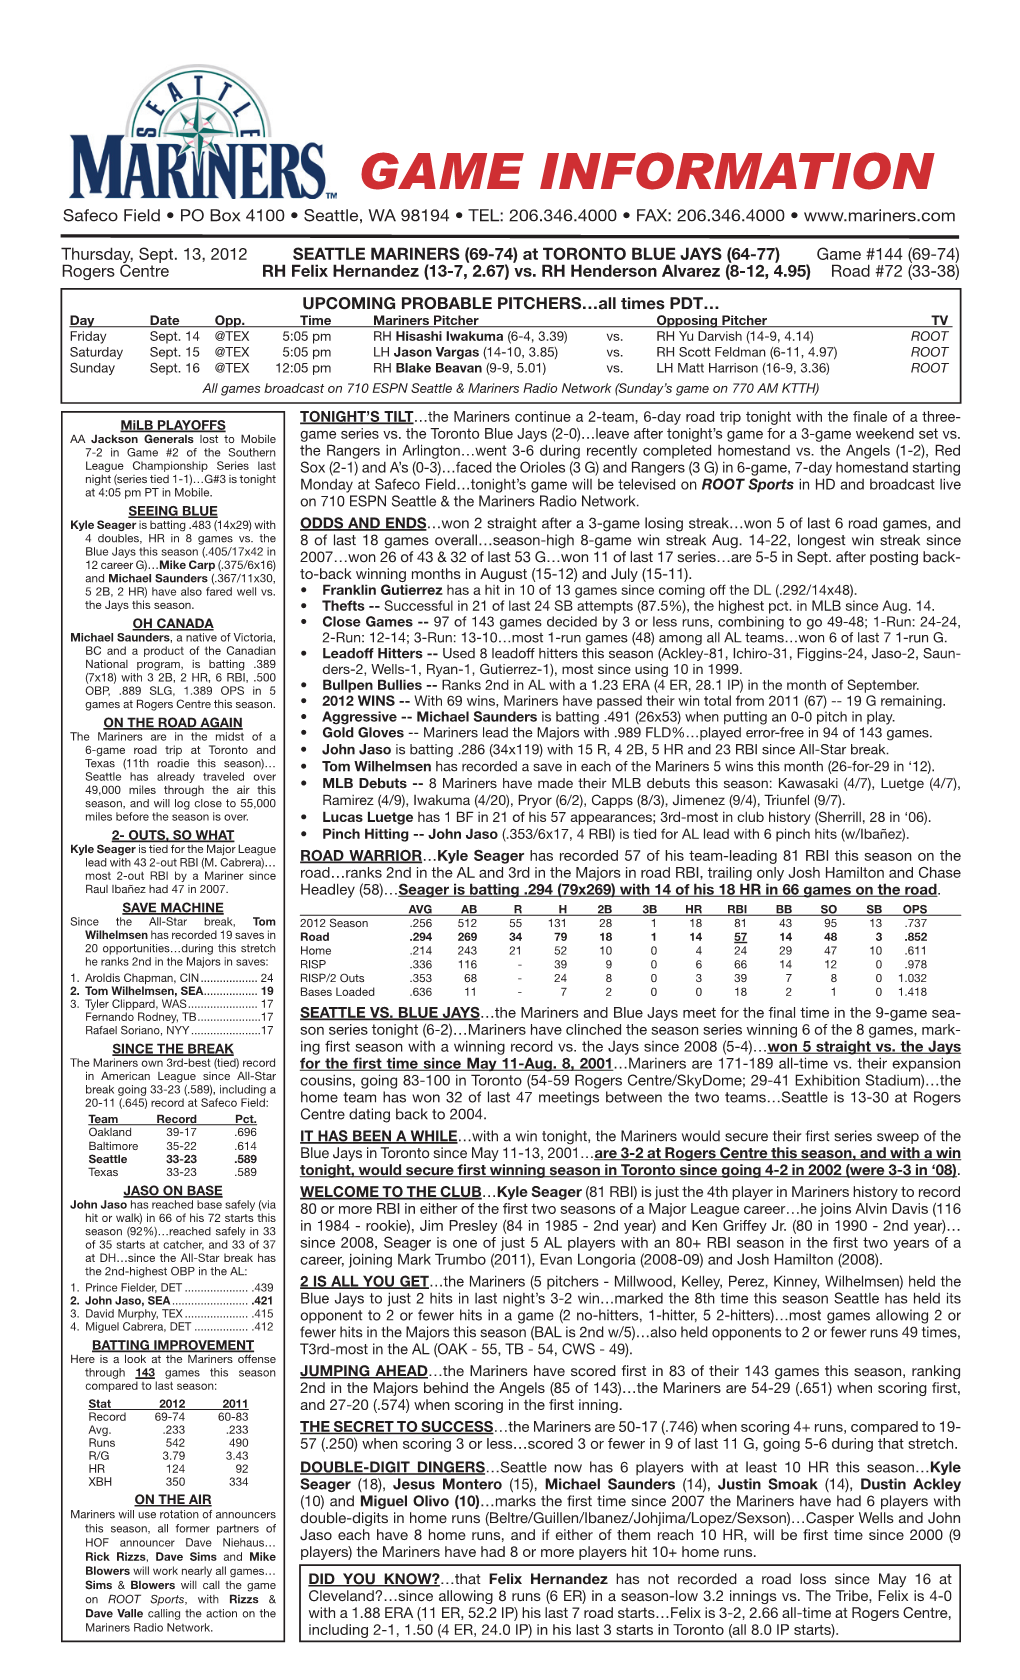 Mariners Game Notes • THURSDAY • SEPTEMBER 13, 2012 • at TORONTO BLUE JAYS • Page 2